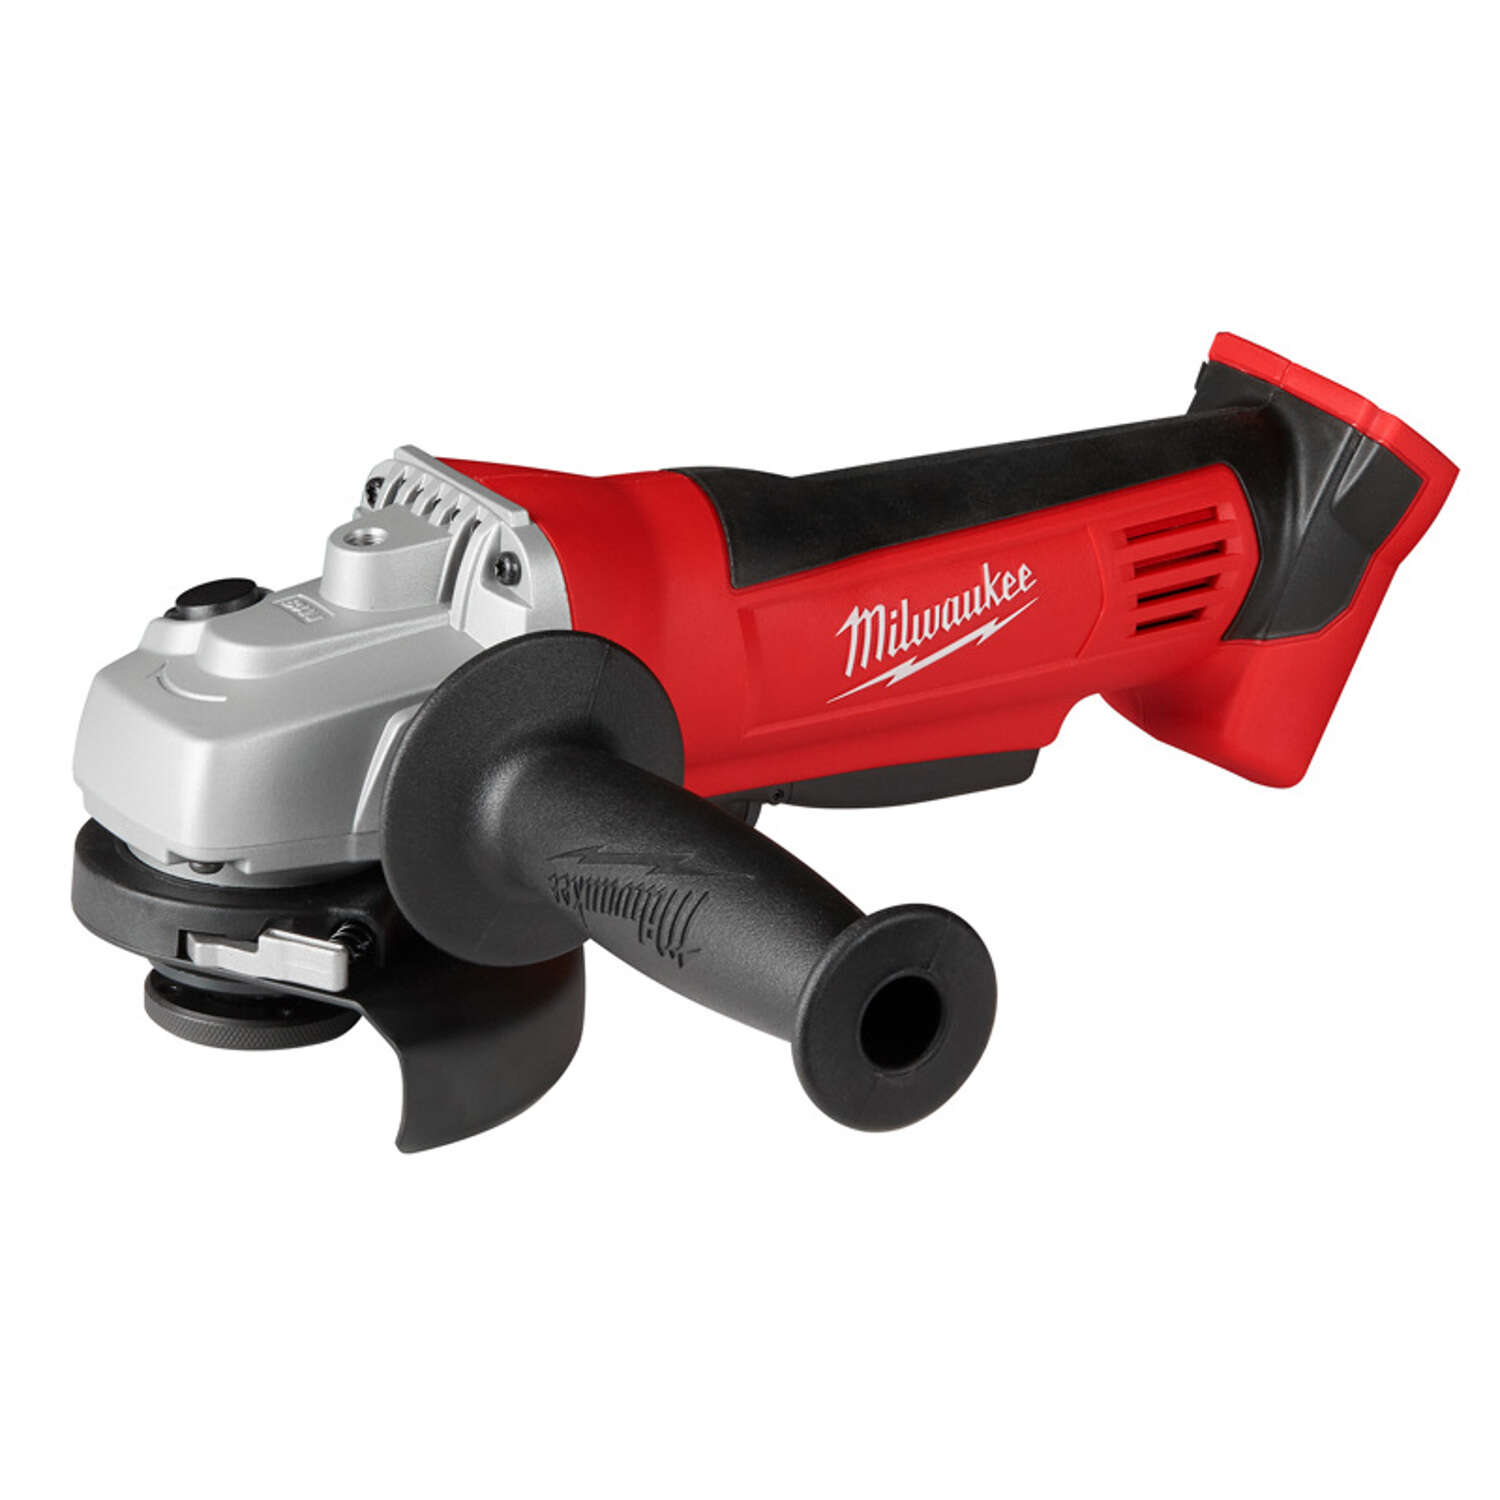 Milwaukee 614130 Angle Grinder for sale online 